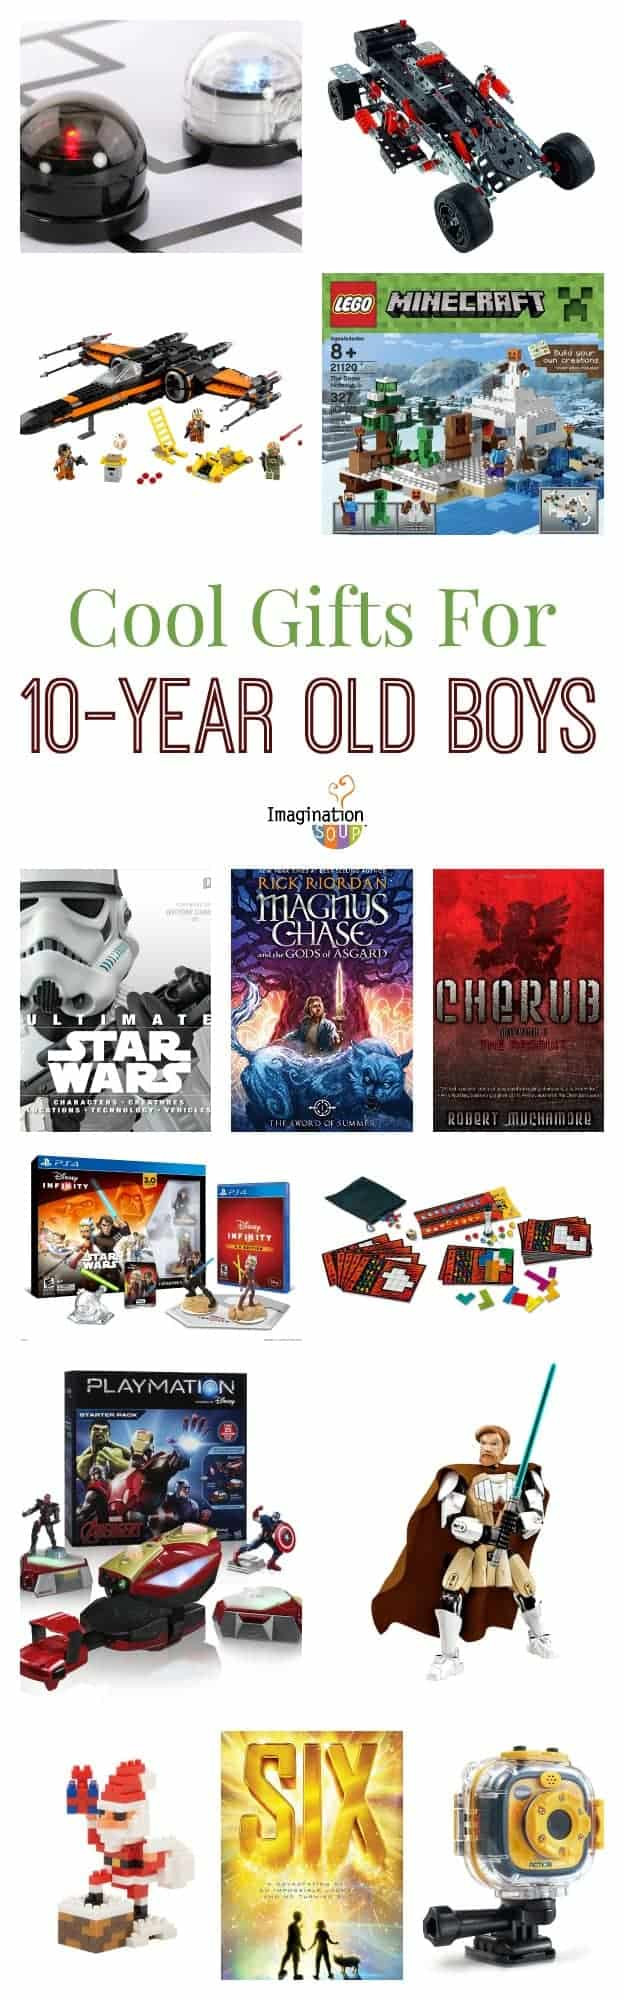 Top Gift Ideas For 10 Year Old Boys
 Gifts for 10 Year Old Boys